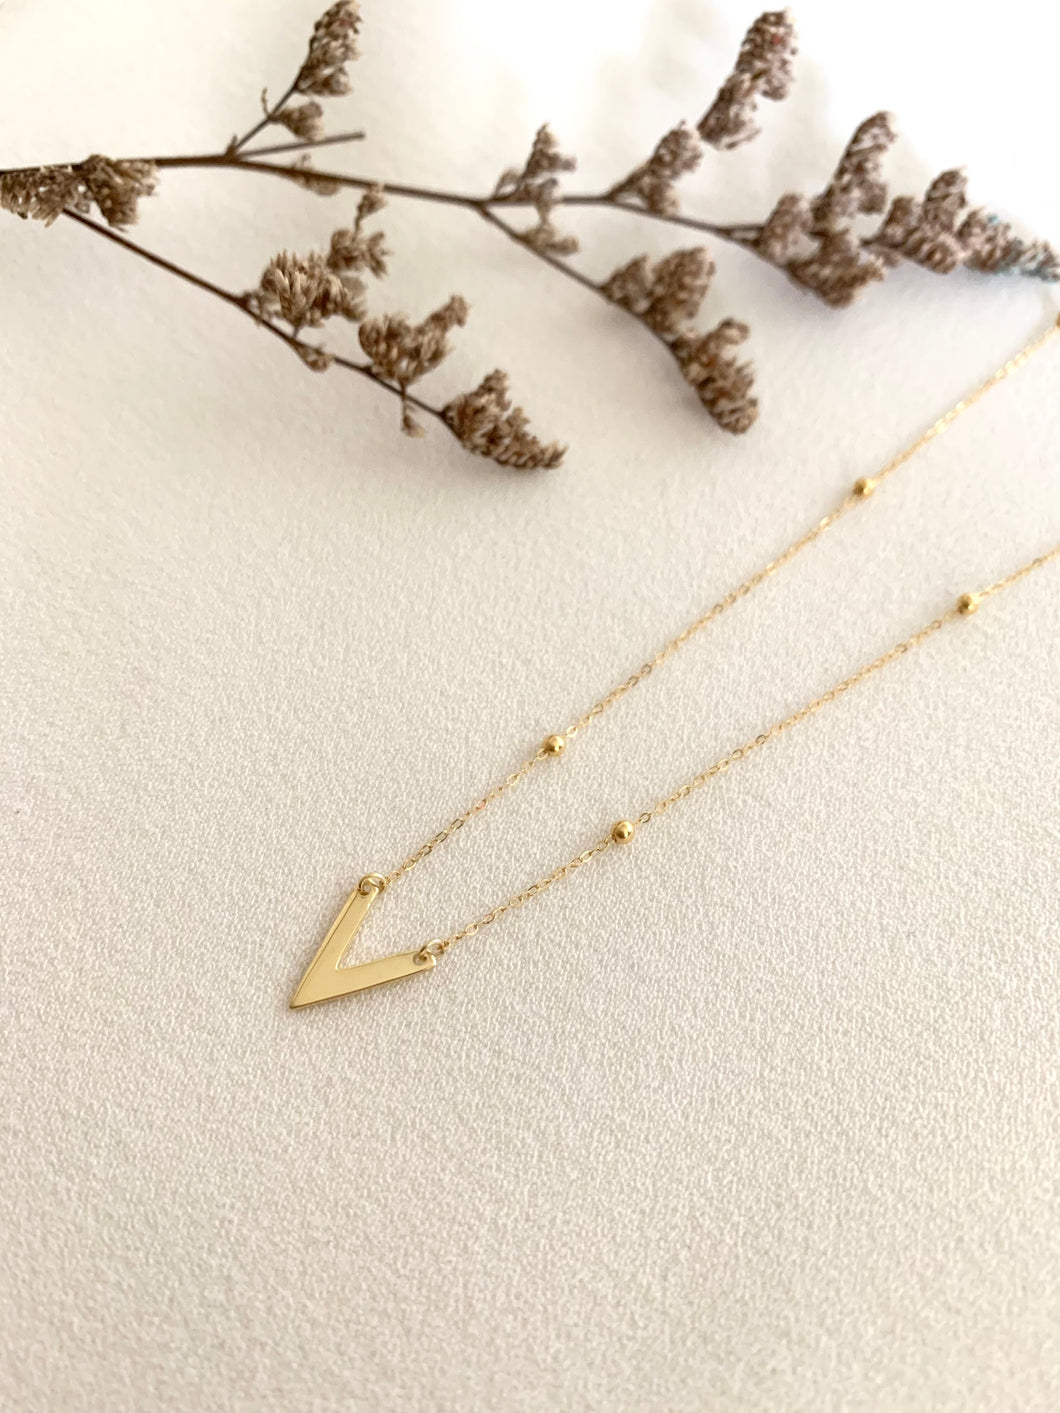 Initial Necklace on Beaded Satellite Chain / Bridesmaid Necklace Gift / Jewelry Gifts for her Initial Necklace on a Beaded Satellite Chain - Available in Gold filled(GF) or Sterling Silver(SS) - Disc measures 7mm - Can be personalized with up to 1 character